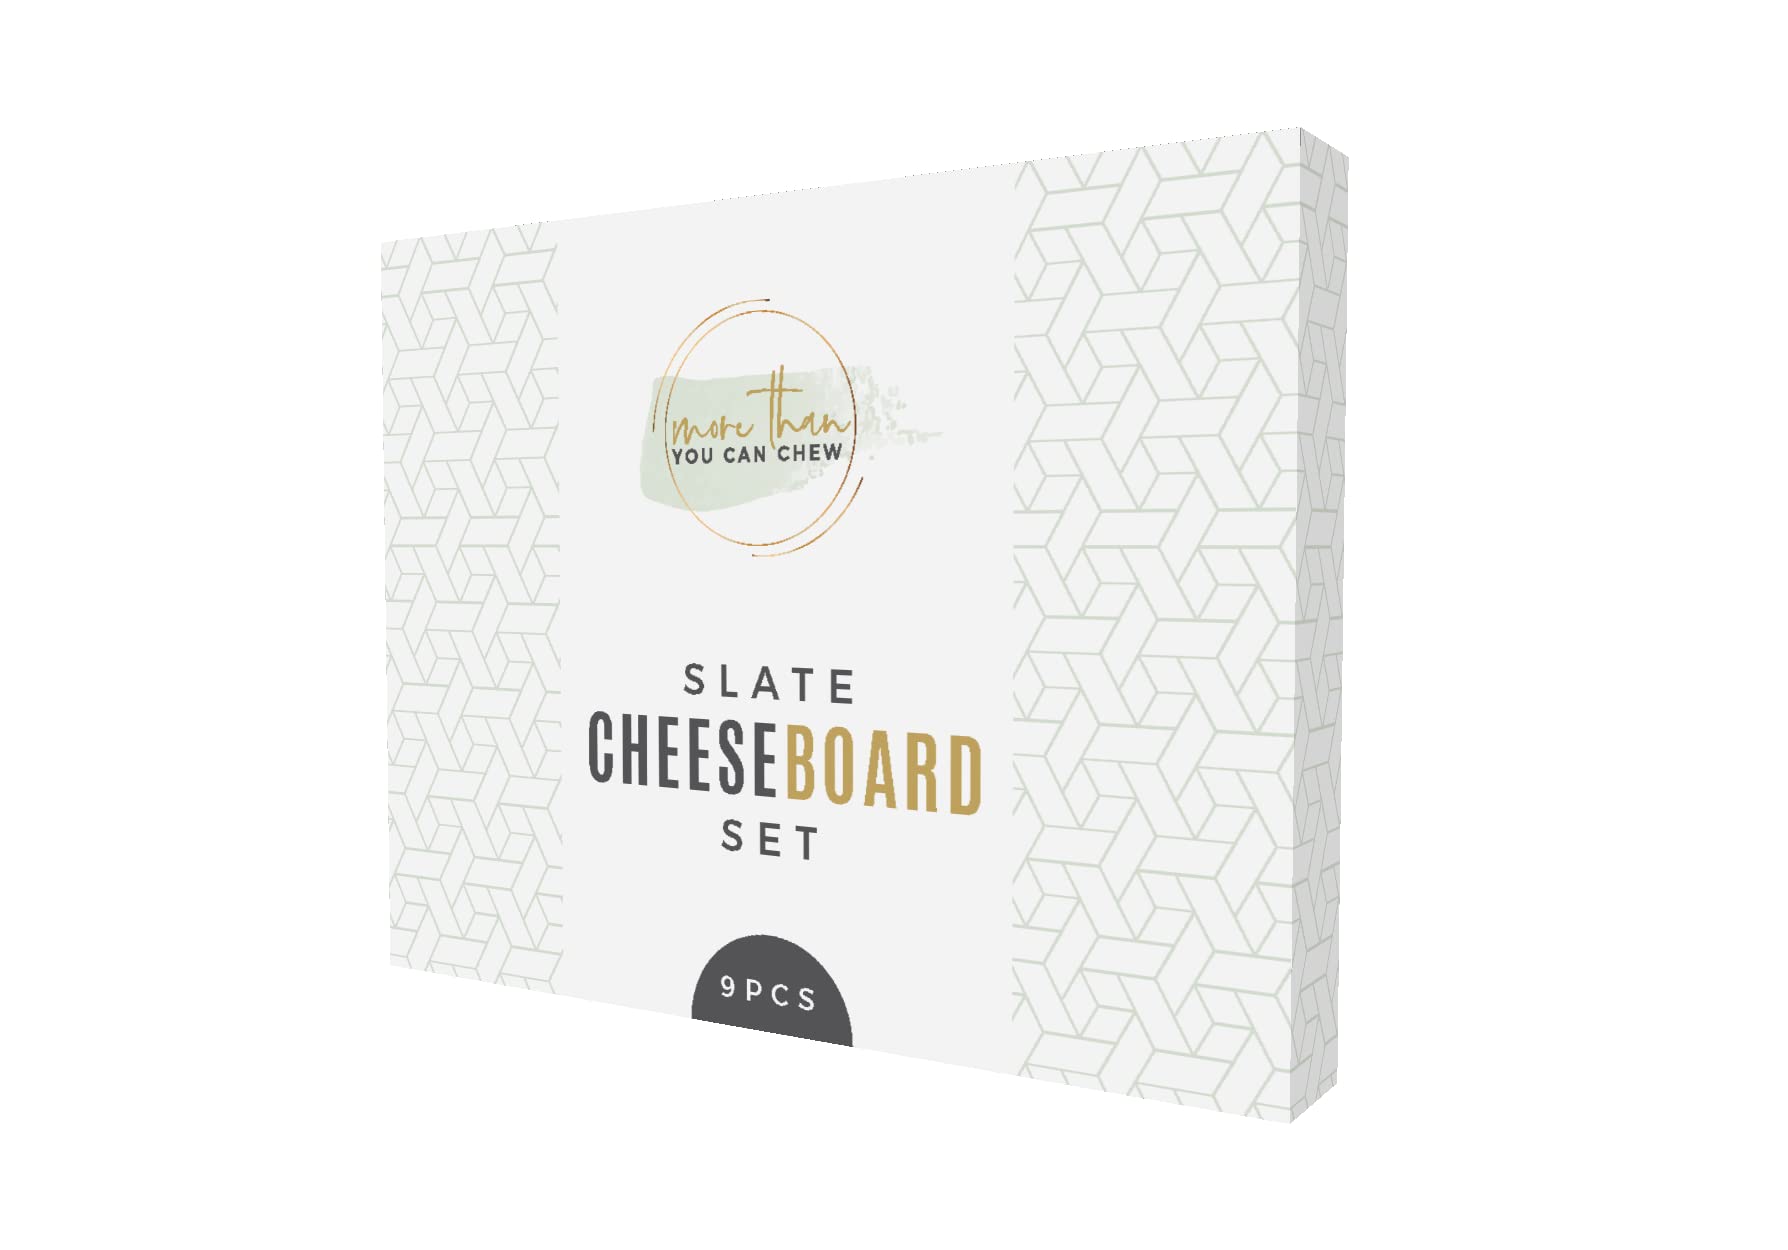 Slate Cheese Board Set with Handles | 9 pcs - 12" x 16" Serving Tray, Stainless Steel Cheese Knife Set with Ceramic Bowls + Soapstone Chalk